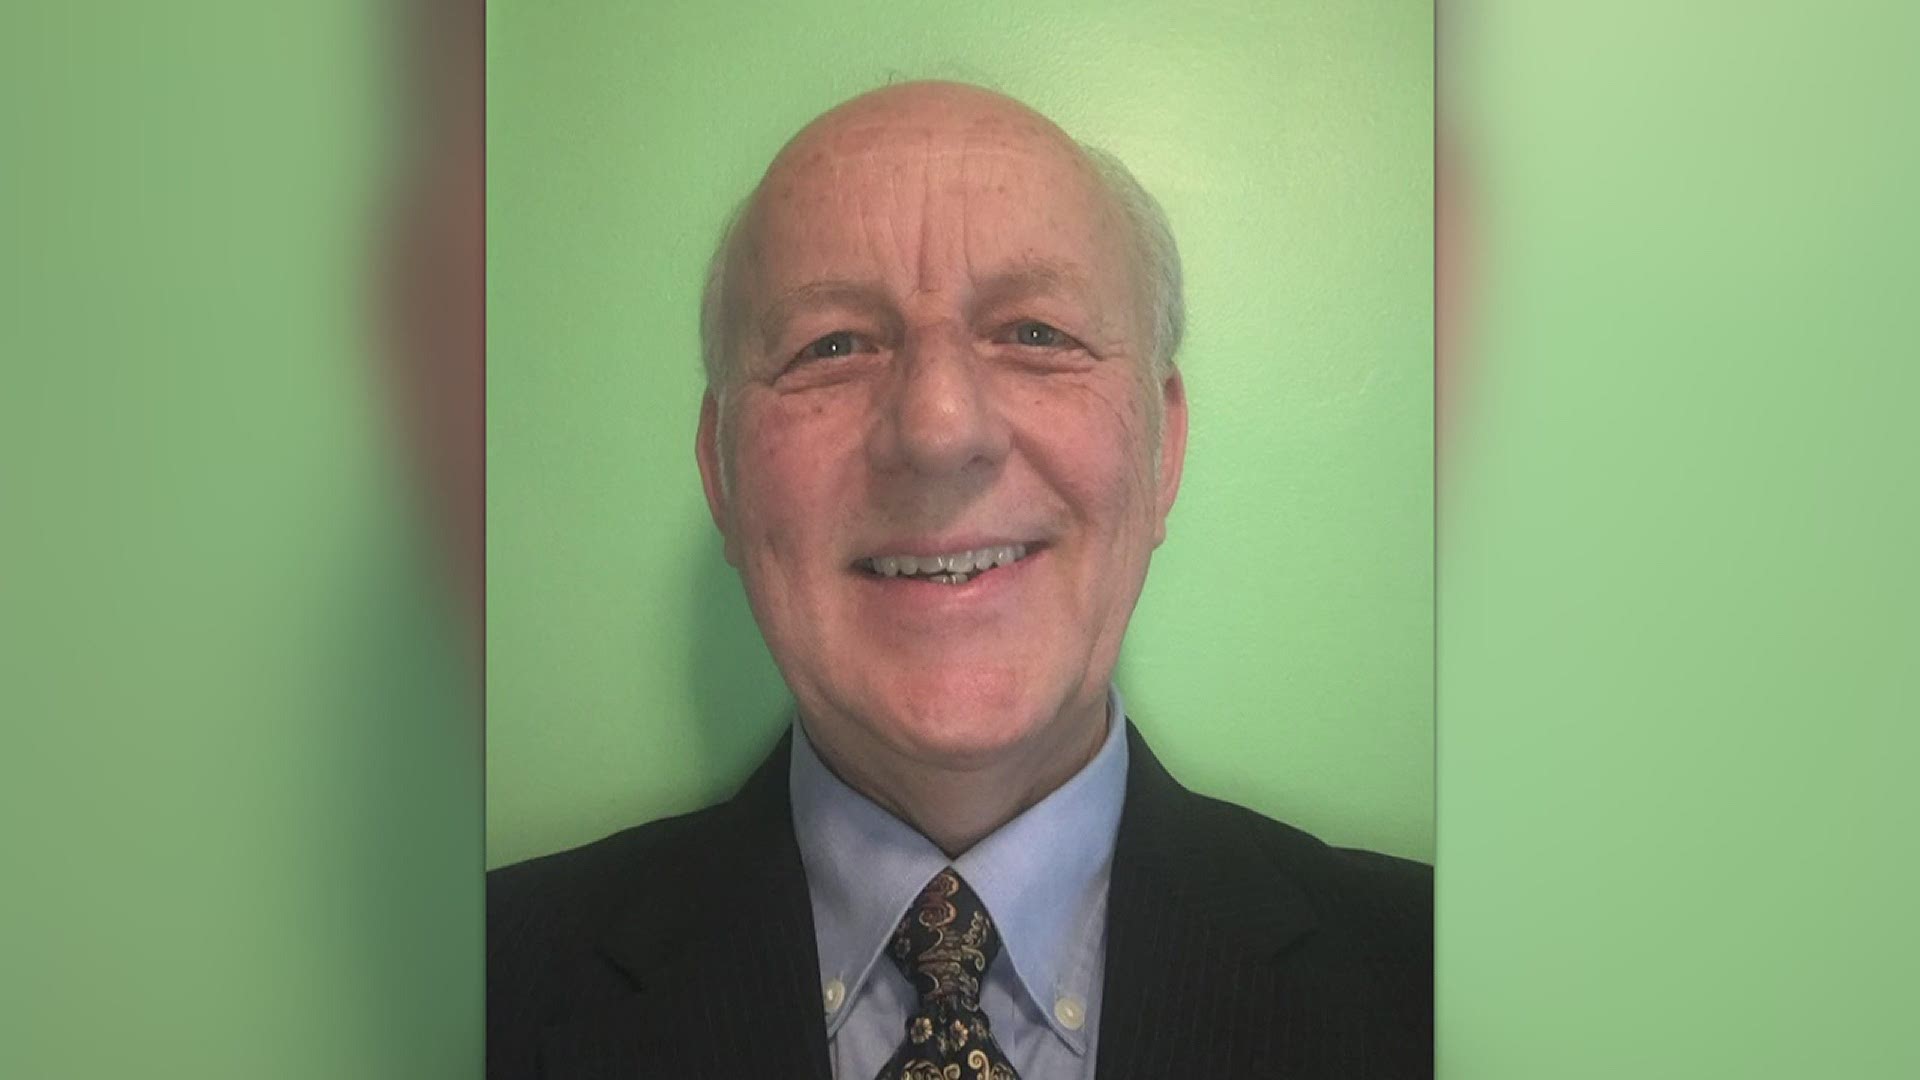 Bogdan "Bob" Vitas, Jr. was approved for employment by Moline's City Council on Tuesday, June 8th, after he was fired from two previous cities.